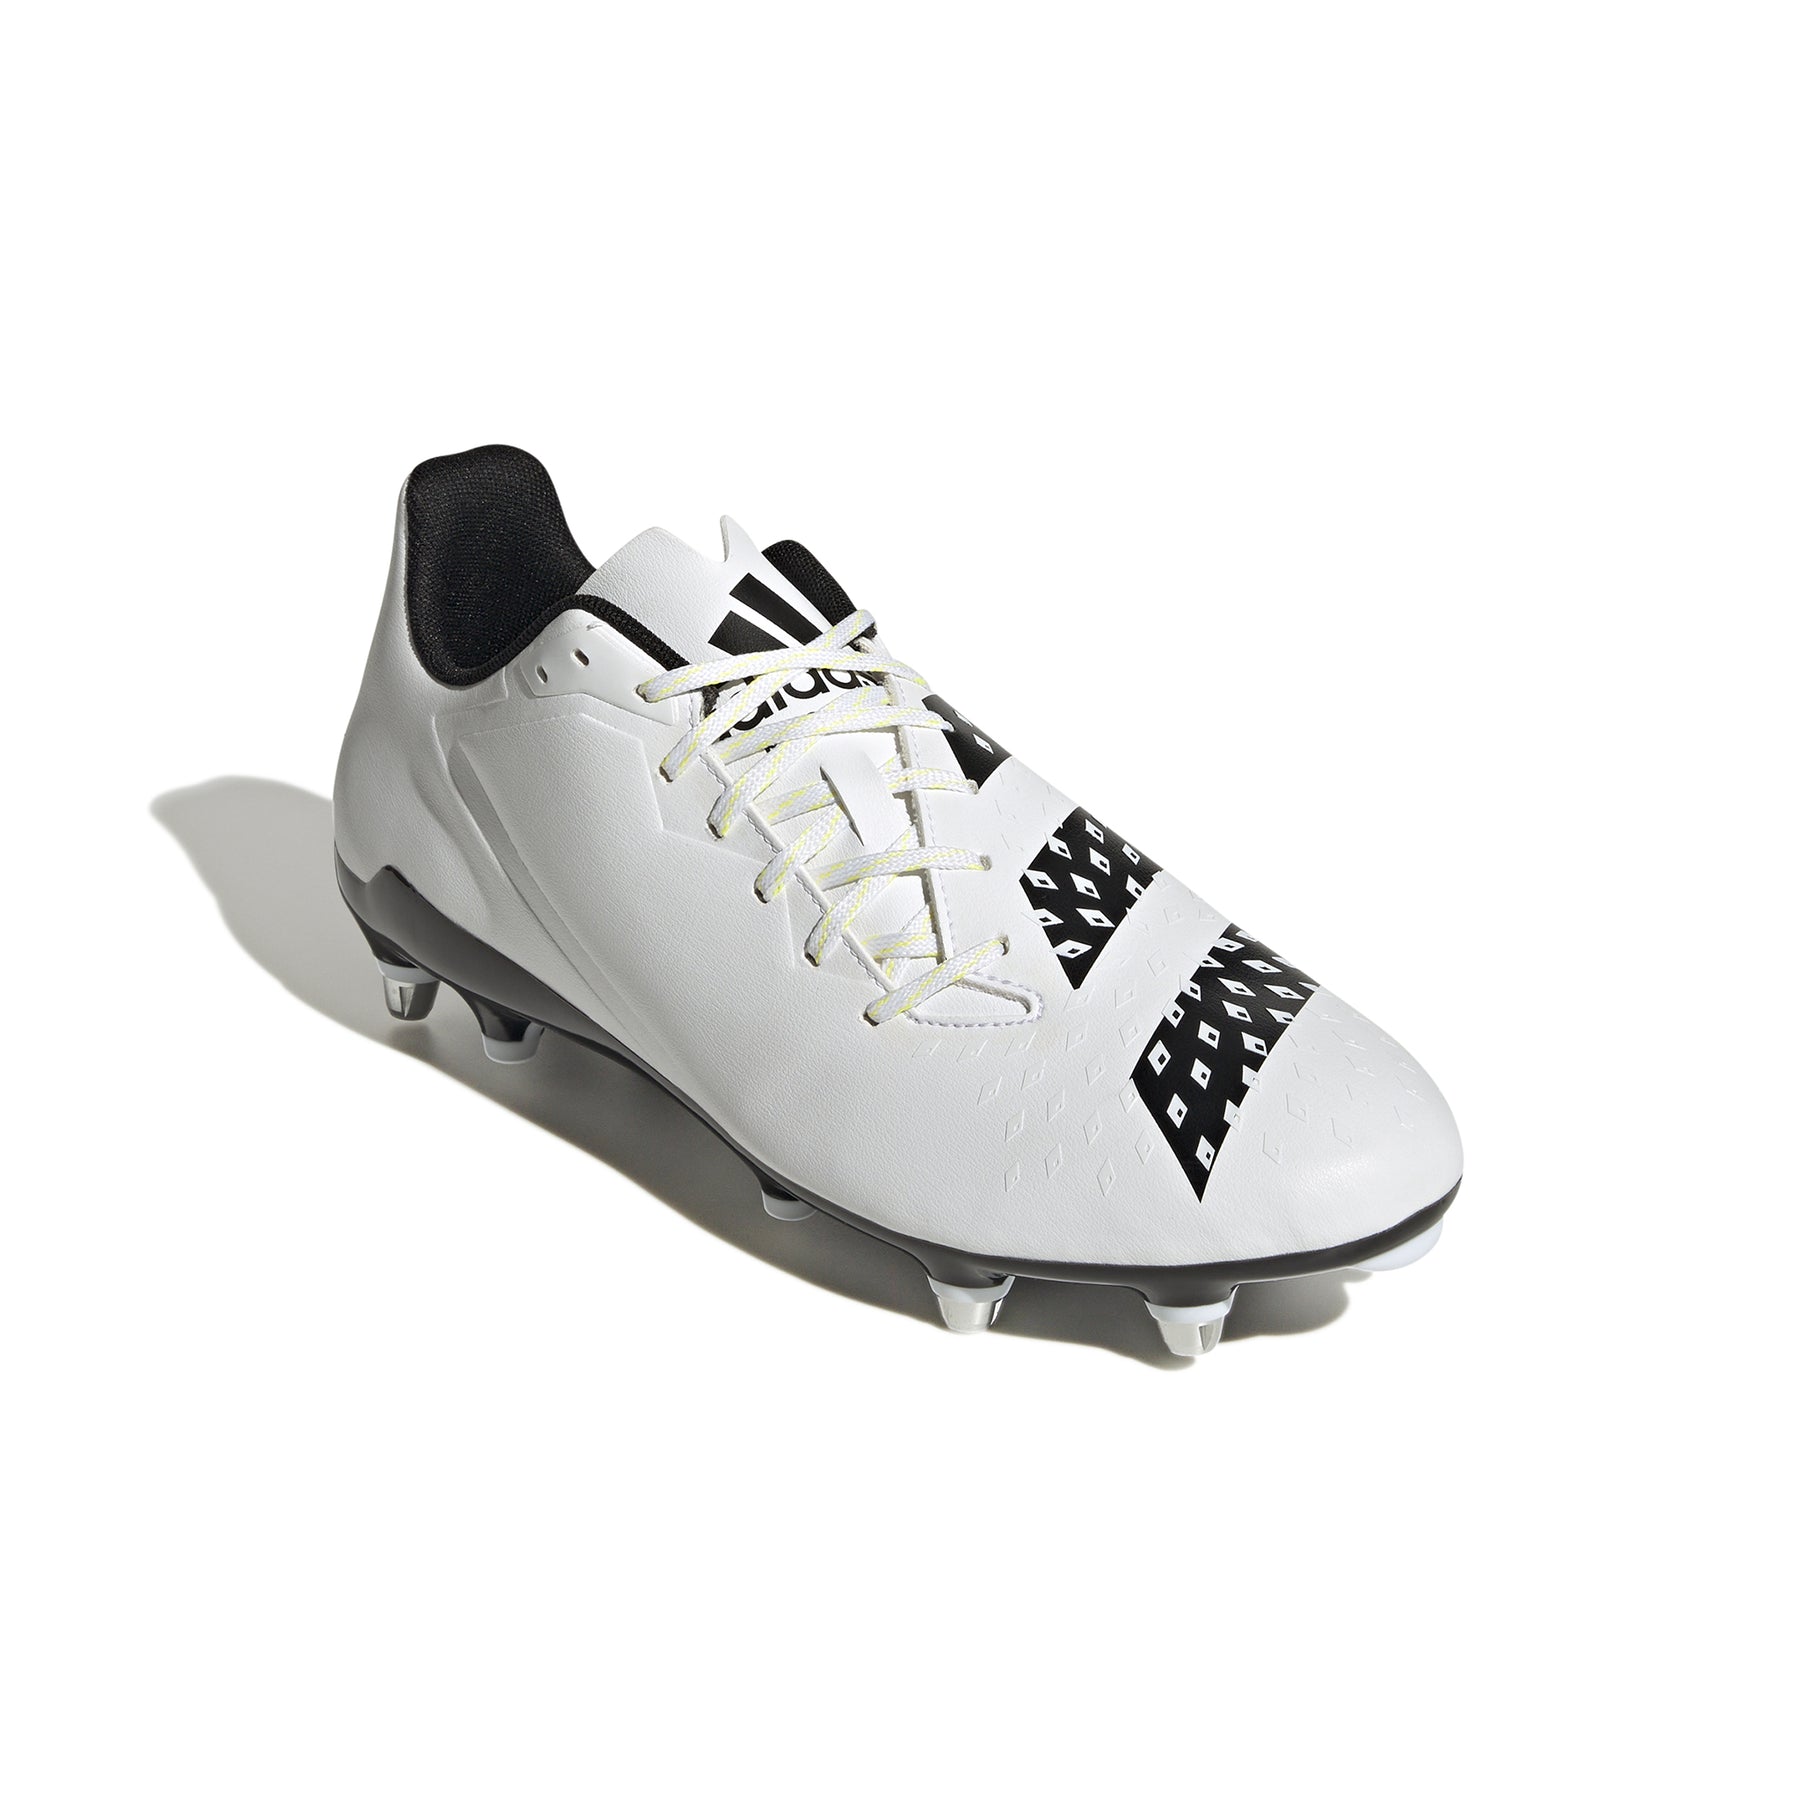 Adidas Malice SG Rugby Boots 2022: White